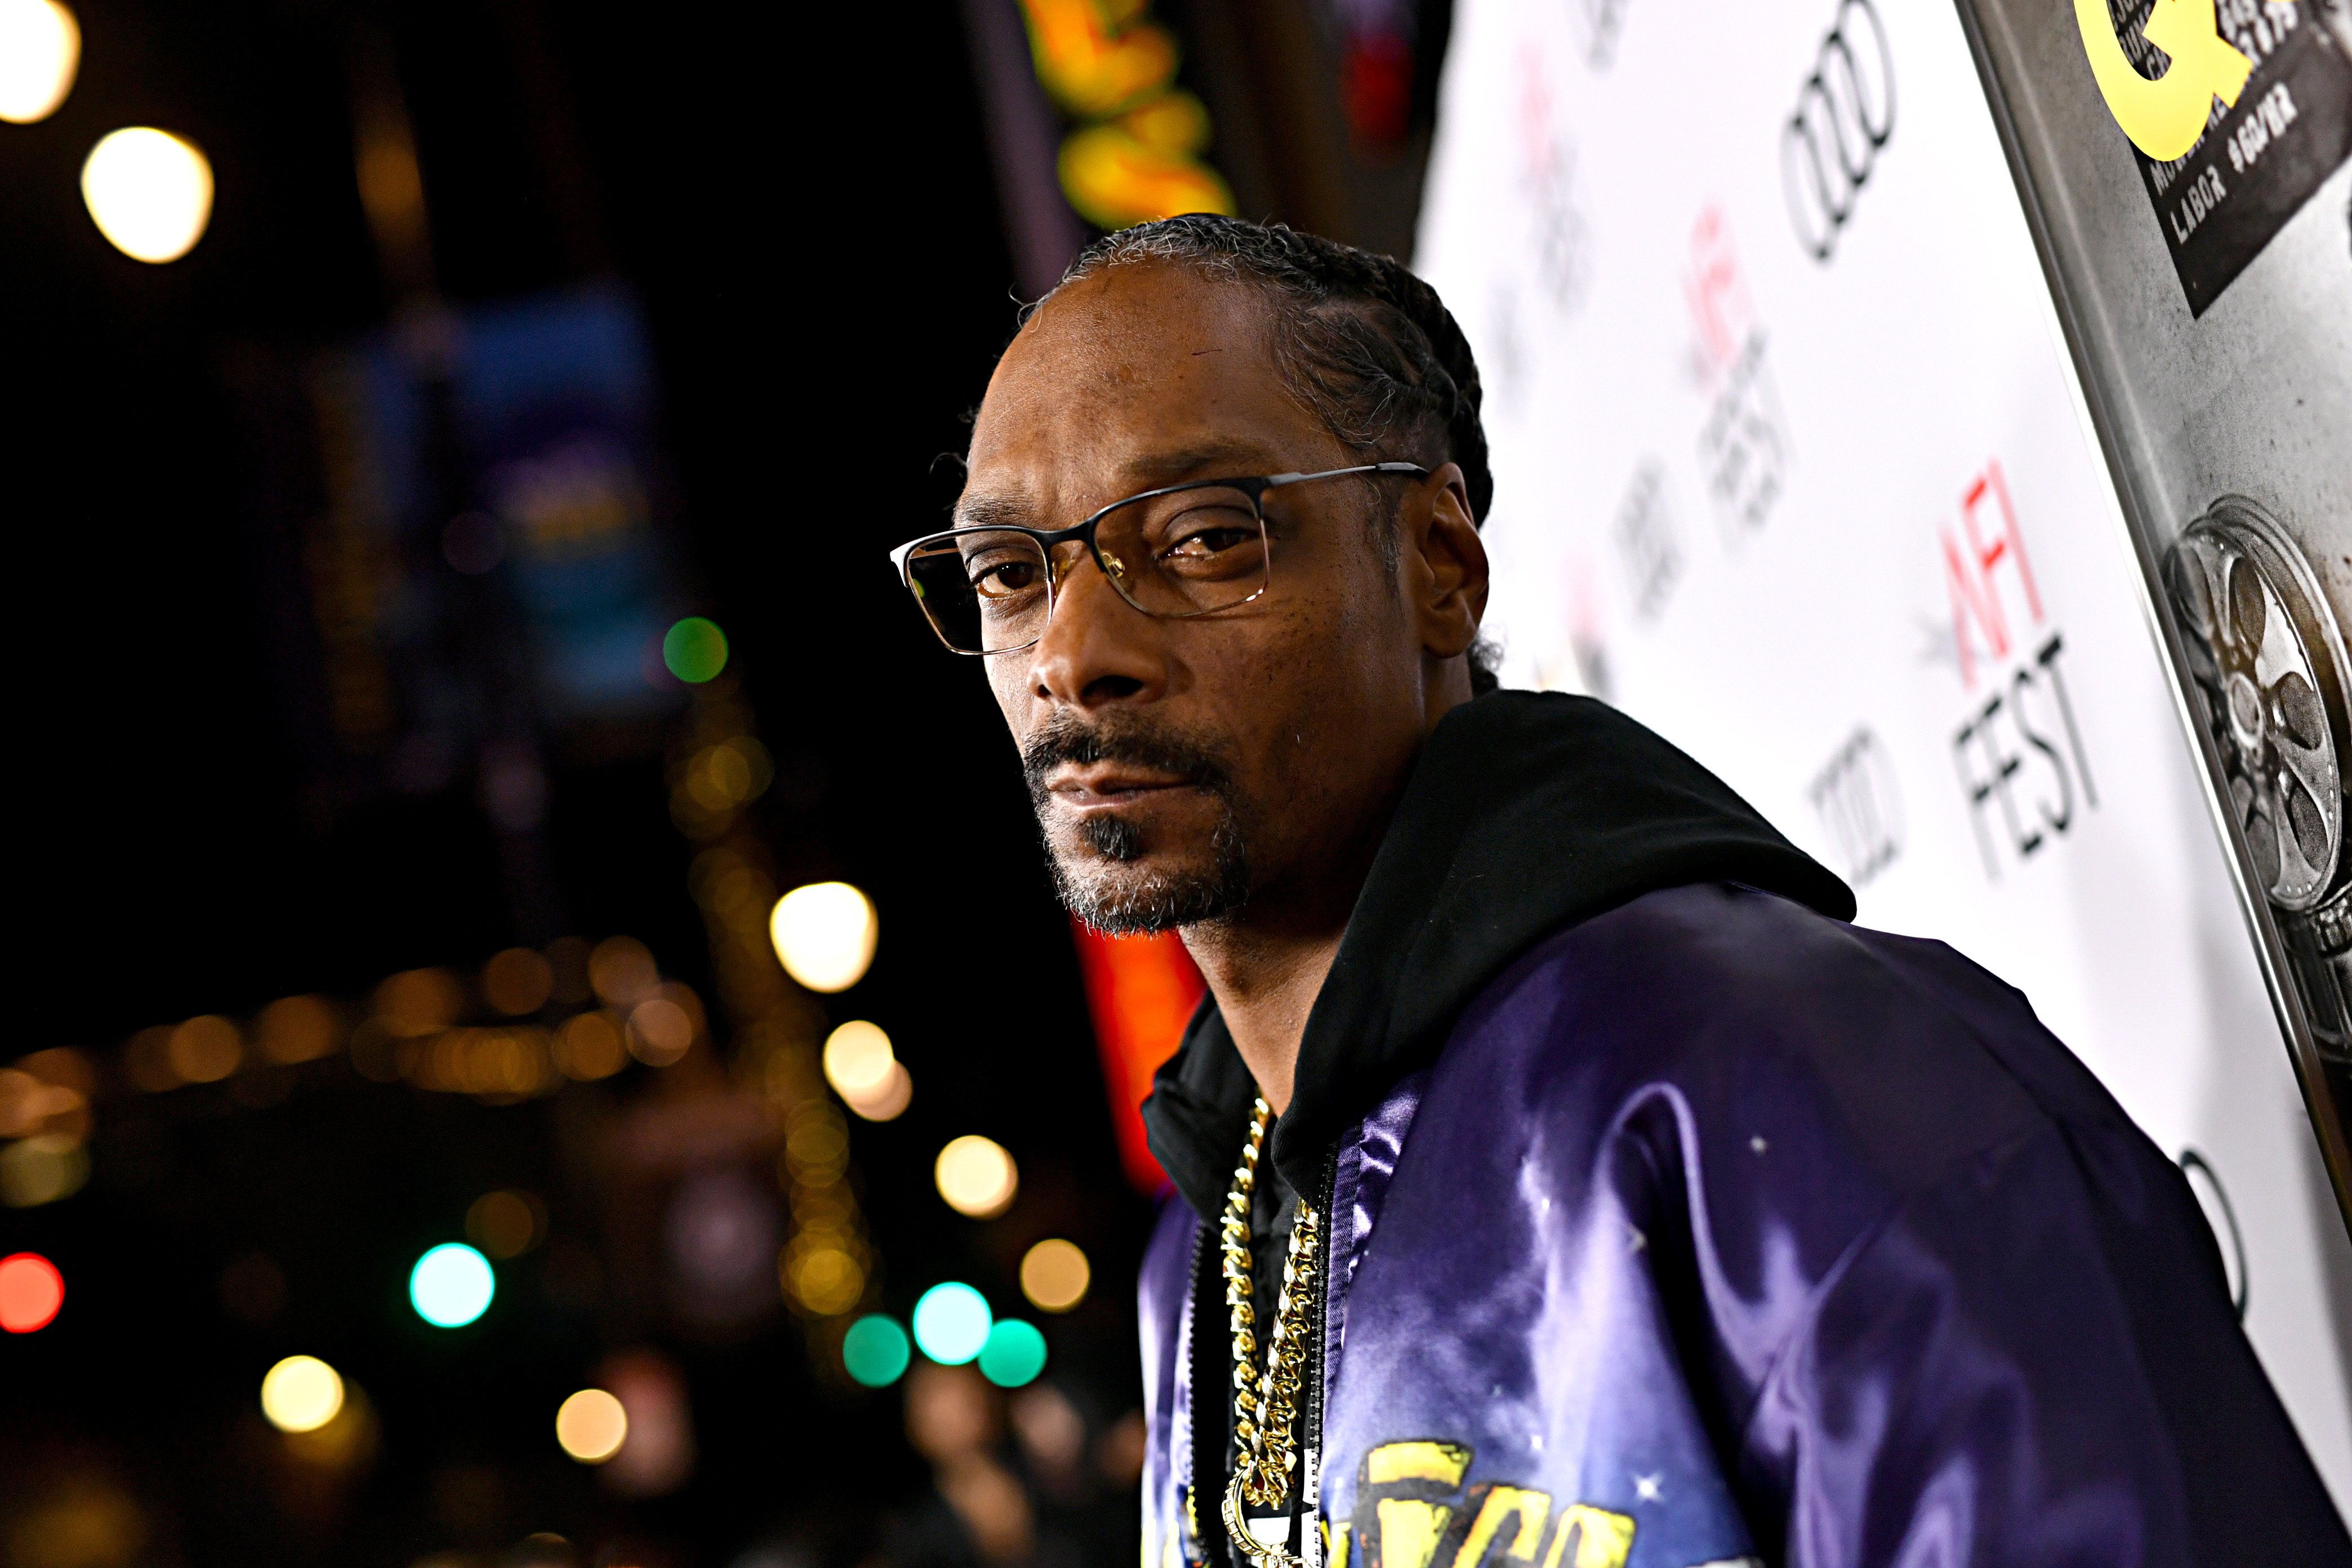 Snoop Dogg at the "Queen & Slim" premiere at the TCL Chinese Theatre on November 14, 2019. | Photo: Getty Images